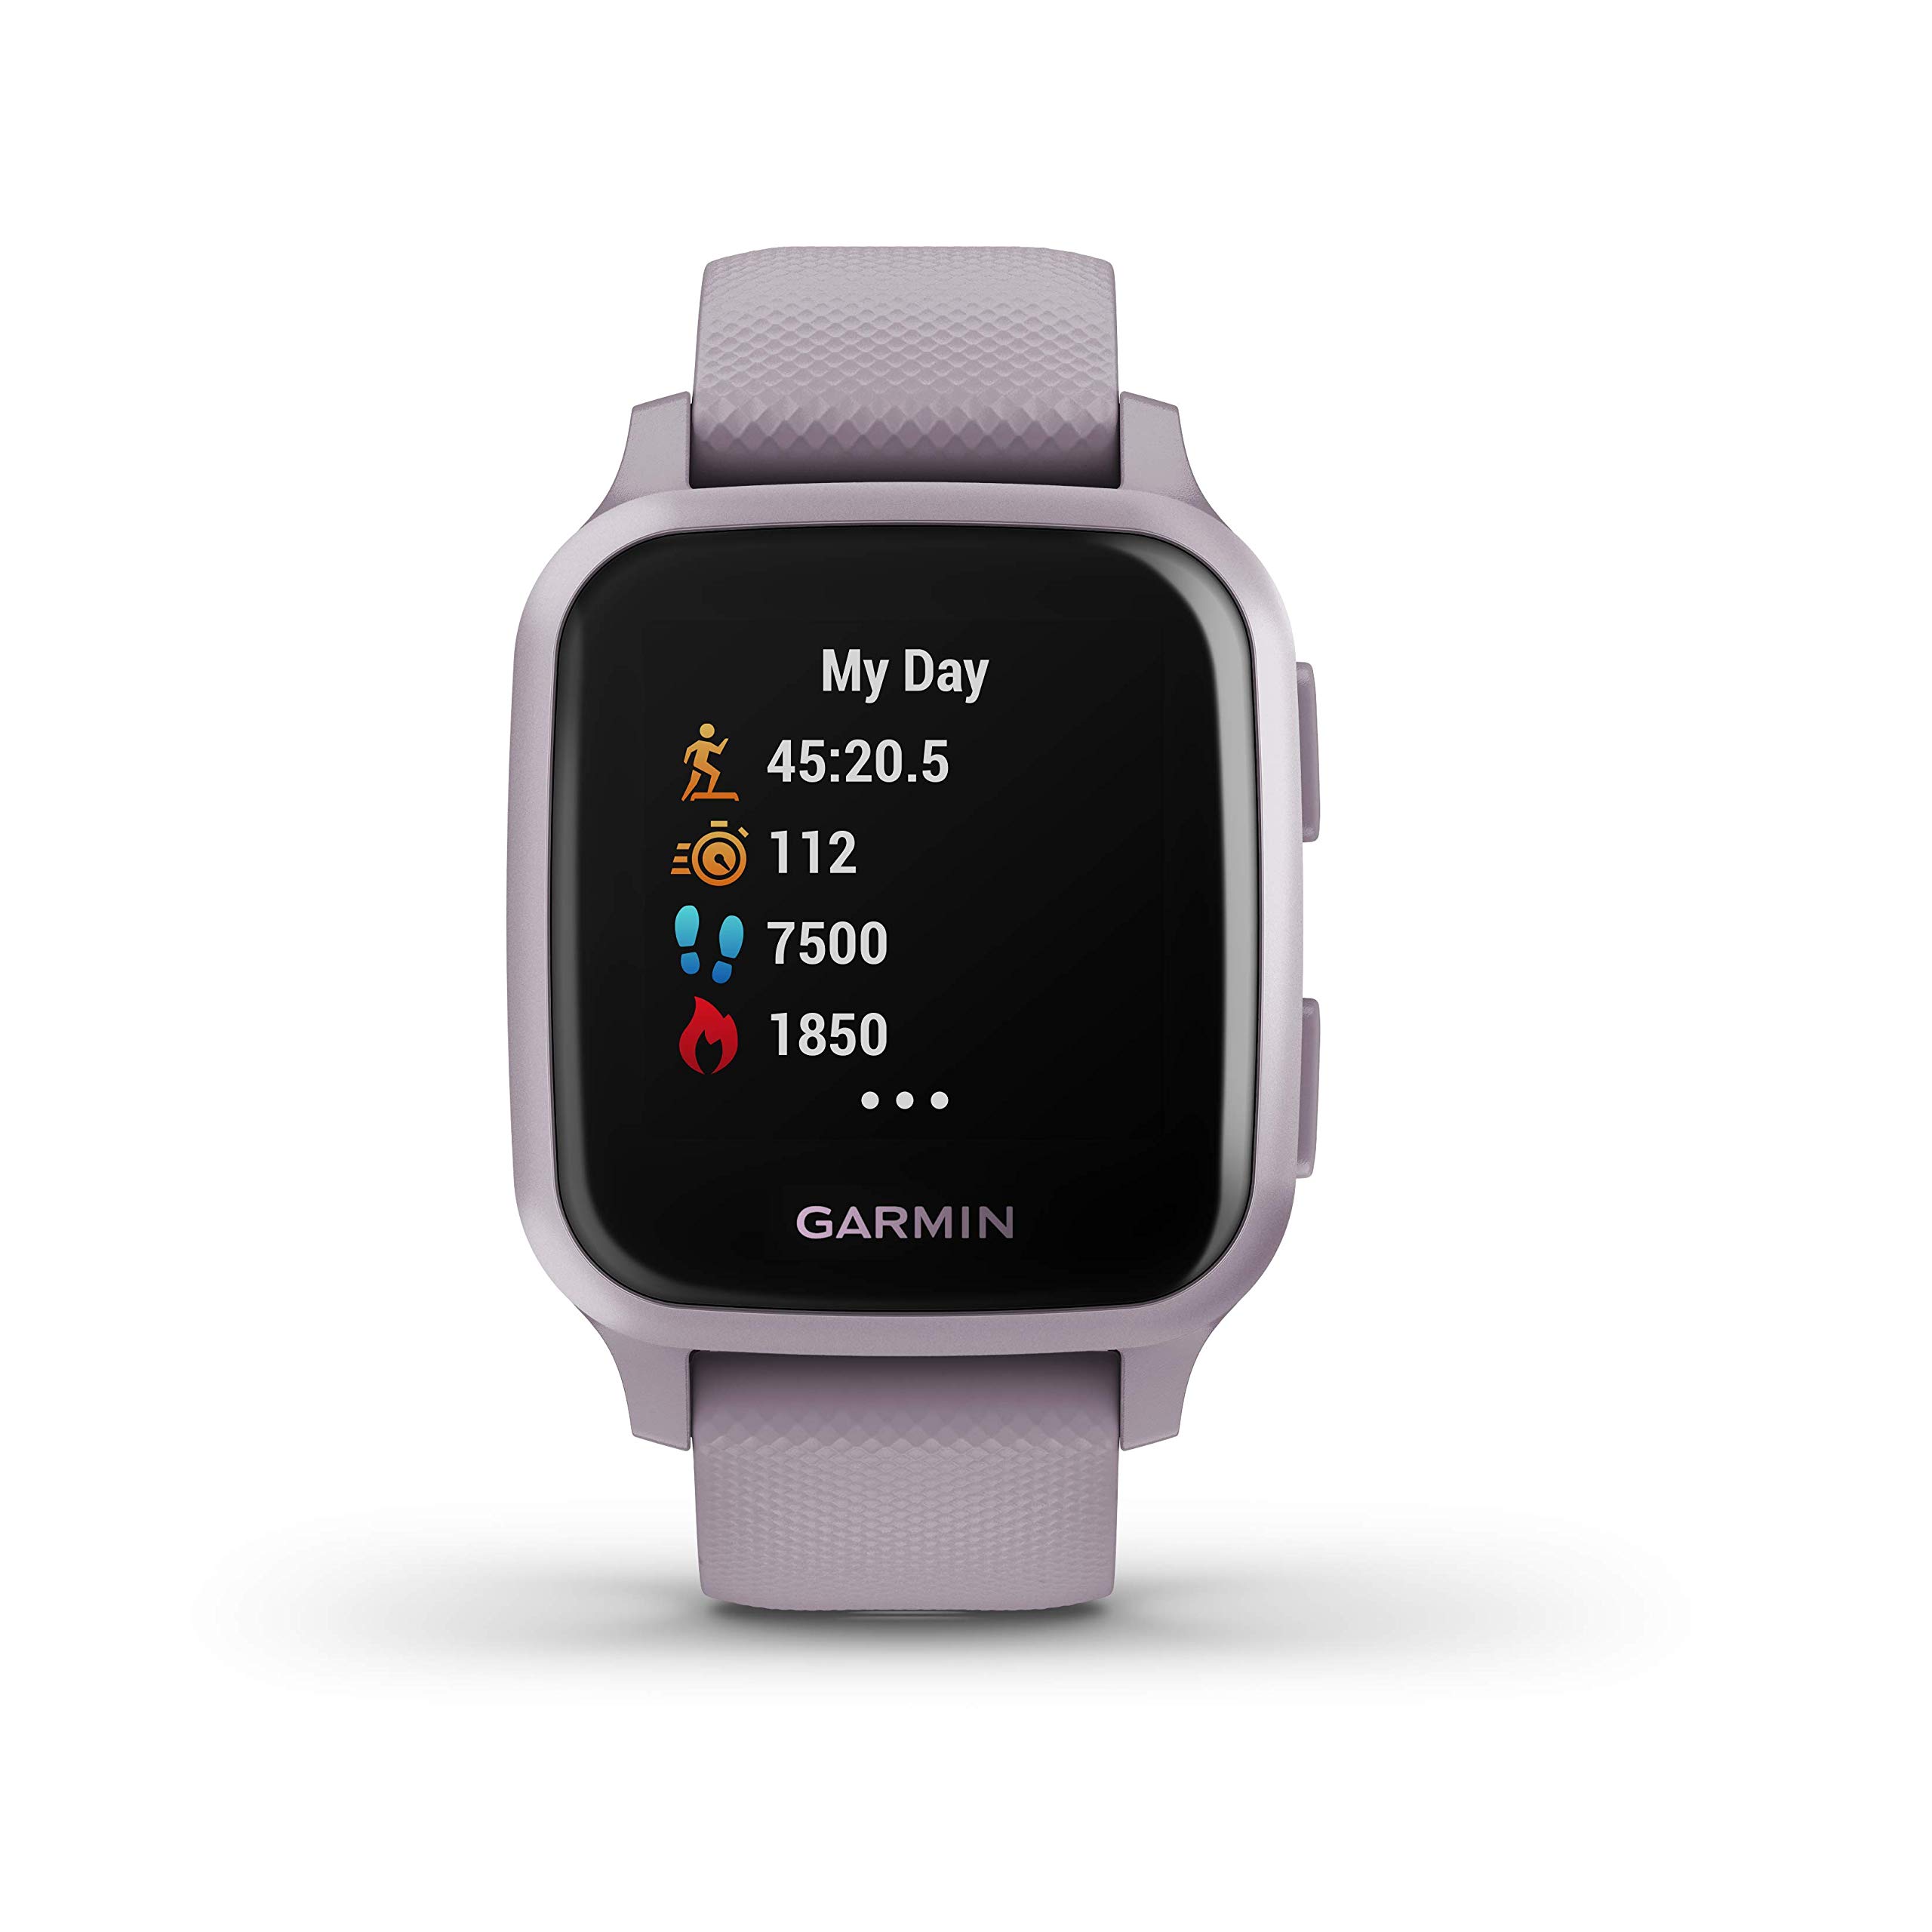 Garmin 010-02427-02 Venu Sq, GPS Smartwatch with Bright Touchscreen Display, Up to 6 Days of Battery Life, Orchid Purple